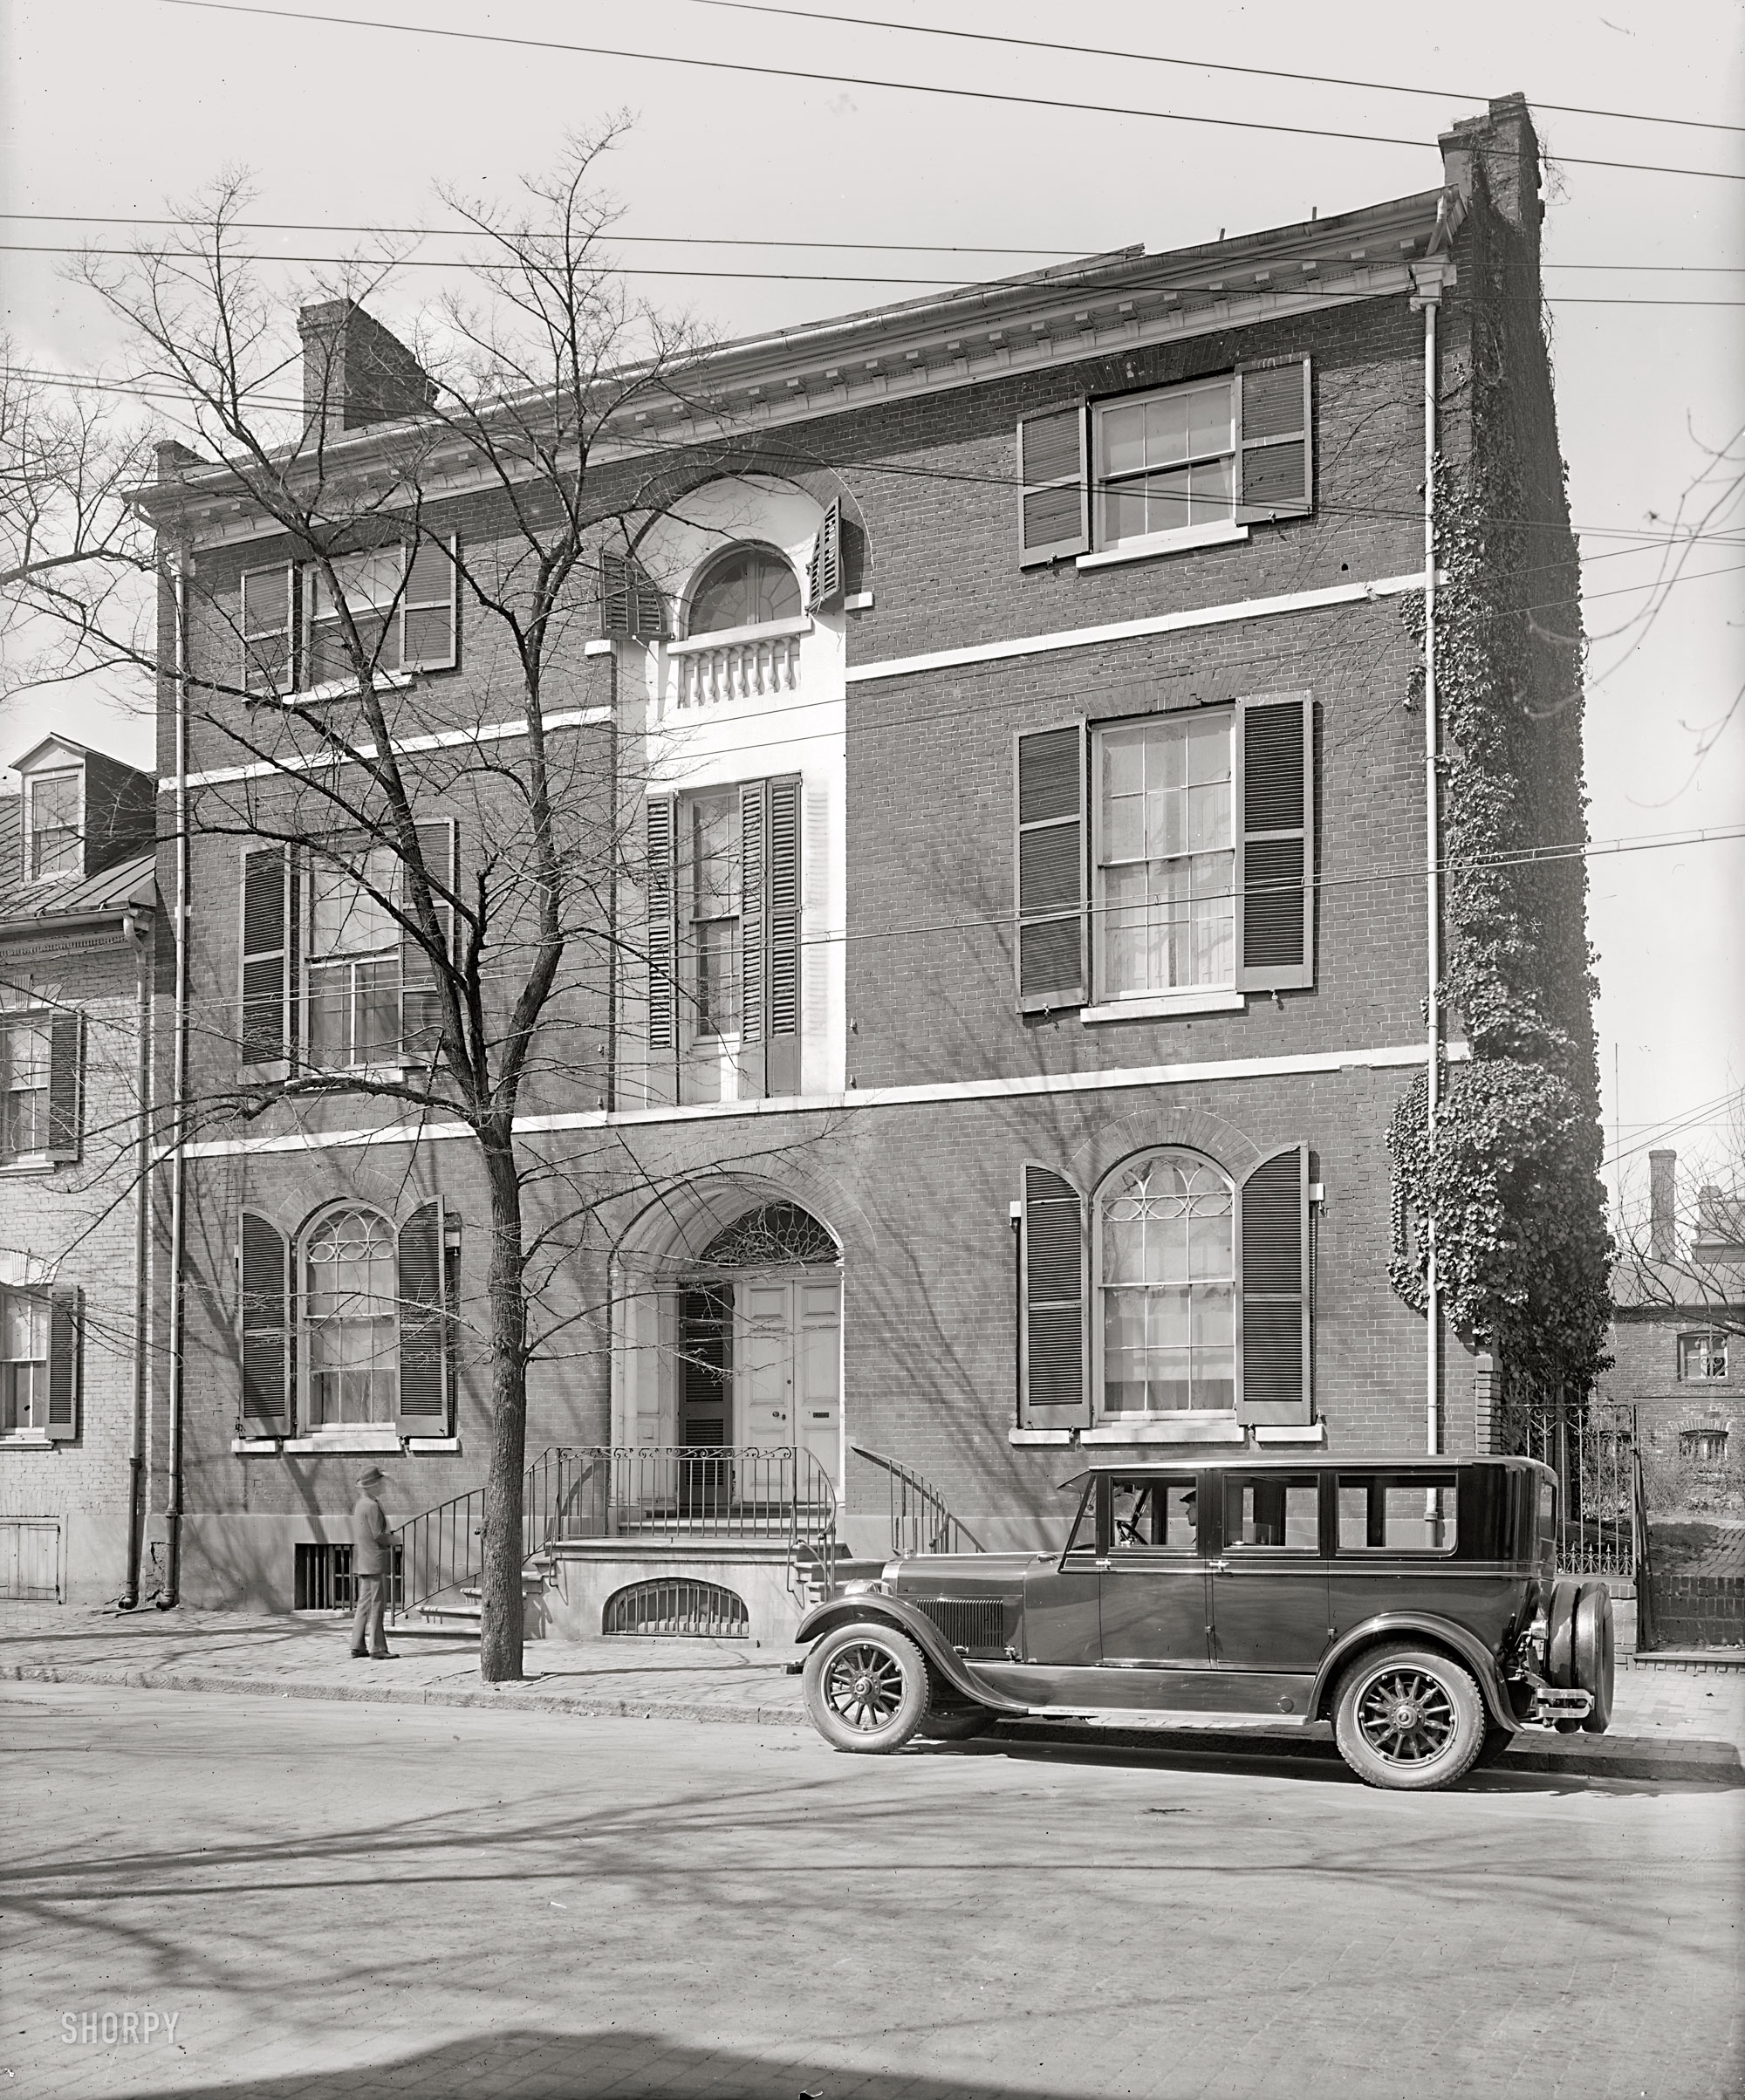 Alexandria, Virginia, circa 1926. "Dr. Fairfax home (Ford Motor Co.)" From a series of photographs, taken for Ford Motor Co., showing Alexandria landmarks. The car here is a Lincoln. National Photo glass negative. View full size.